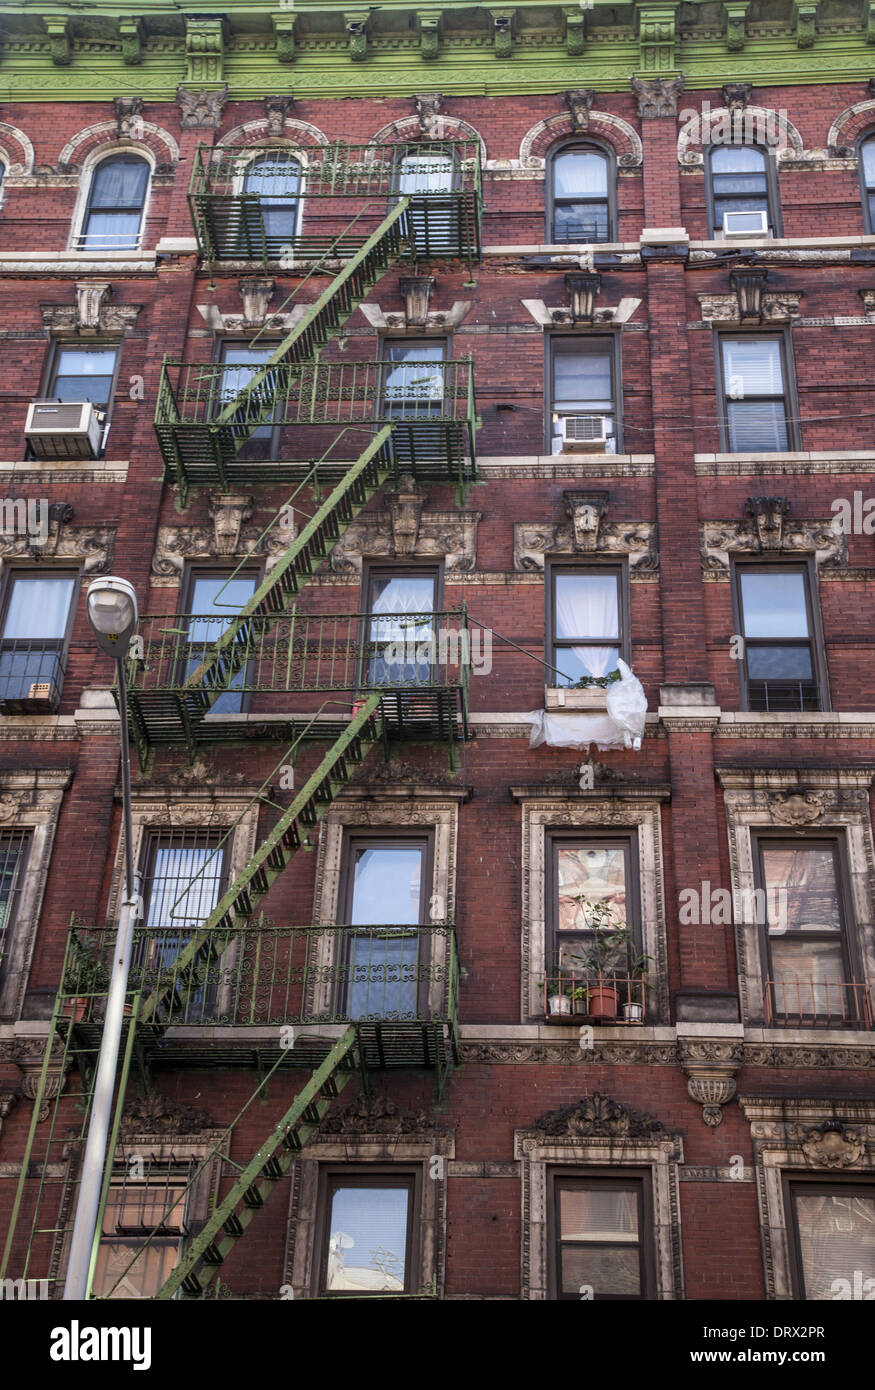 Red Brick apartments in Manhatten, NYC. Stock Photo